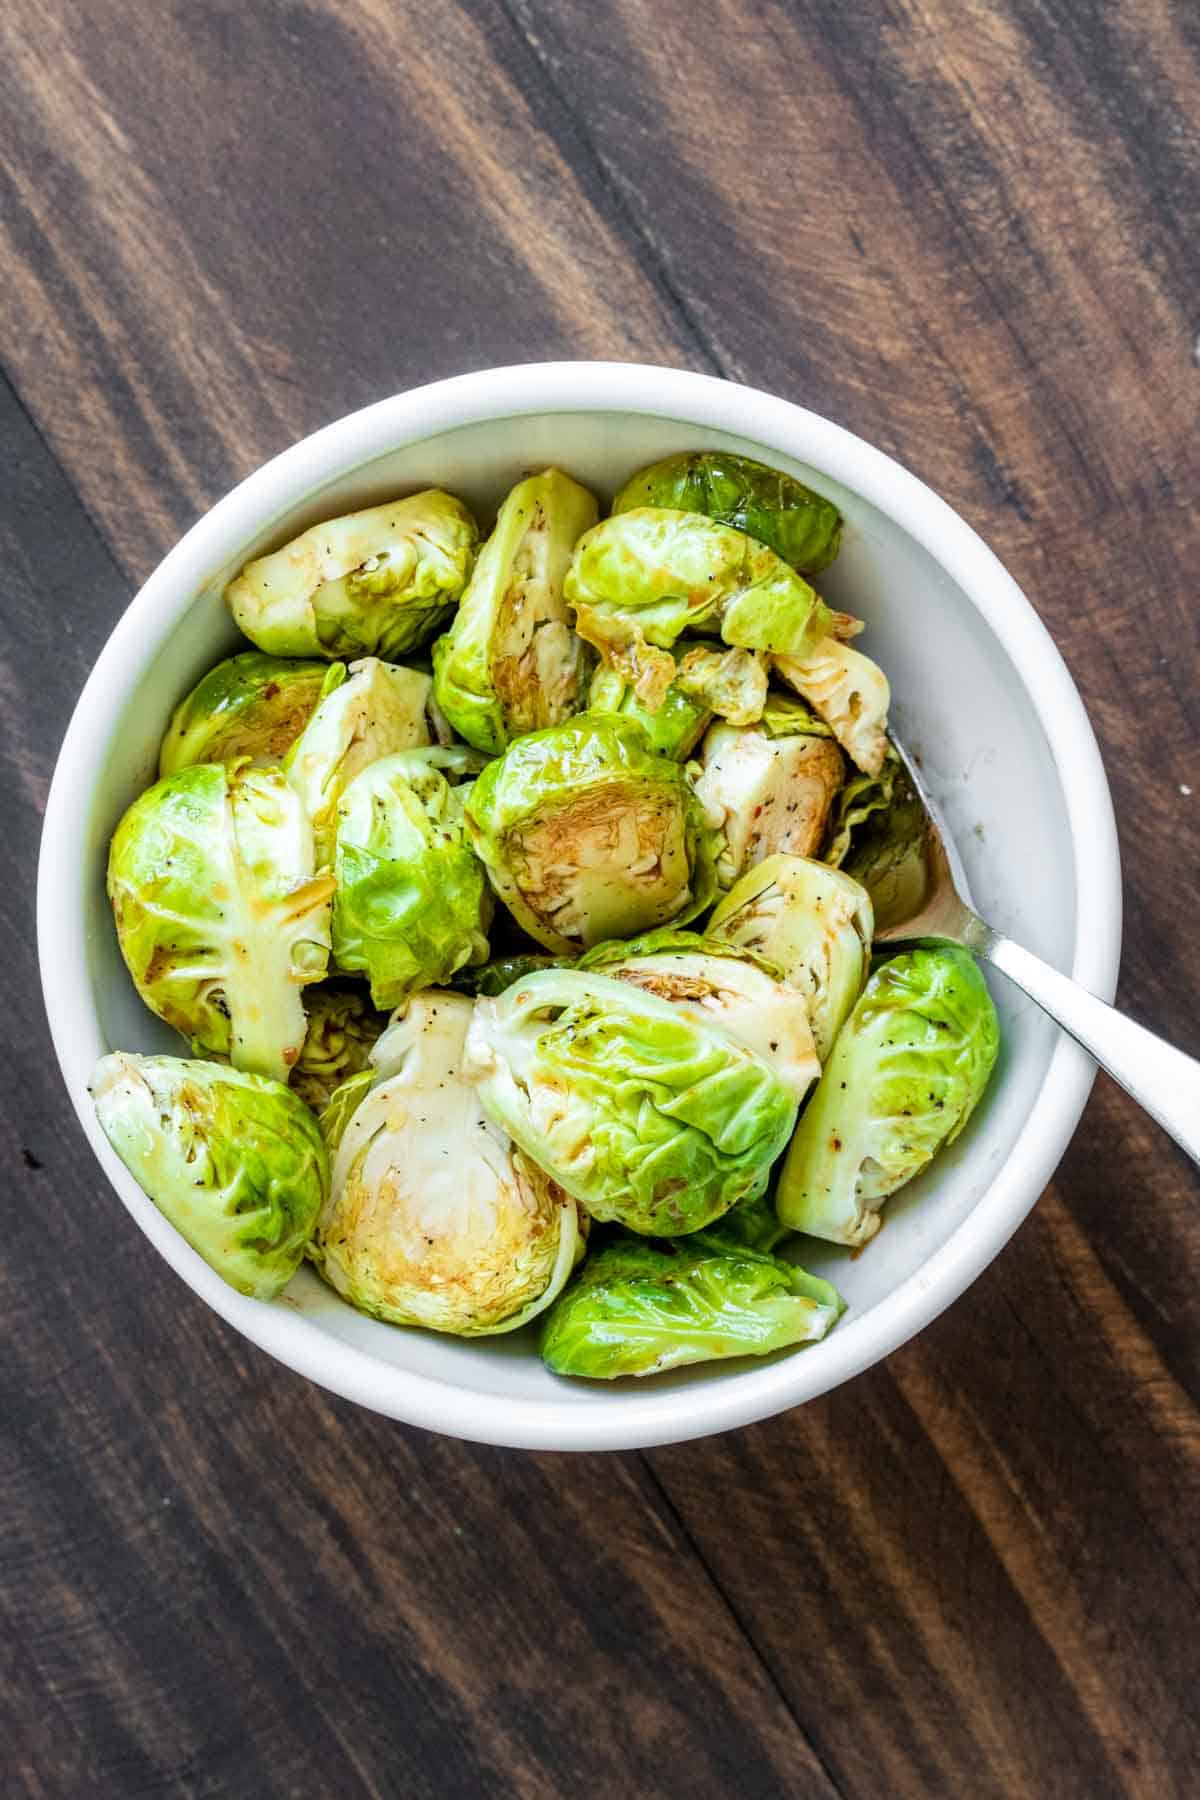 Spoon mixing Brussels sprouts with maple syrup and seasoning in a white bumpy bowl.